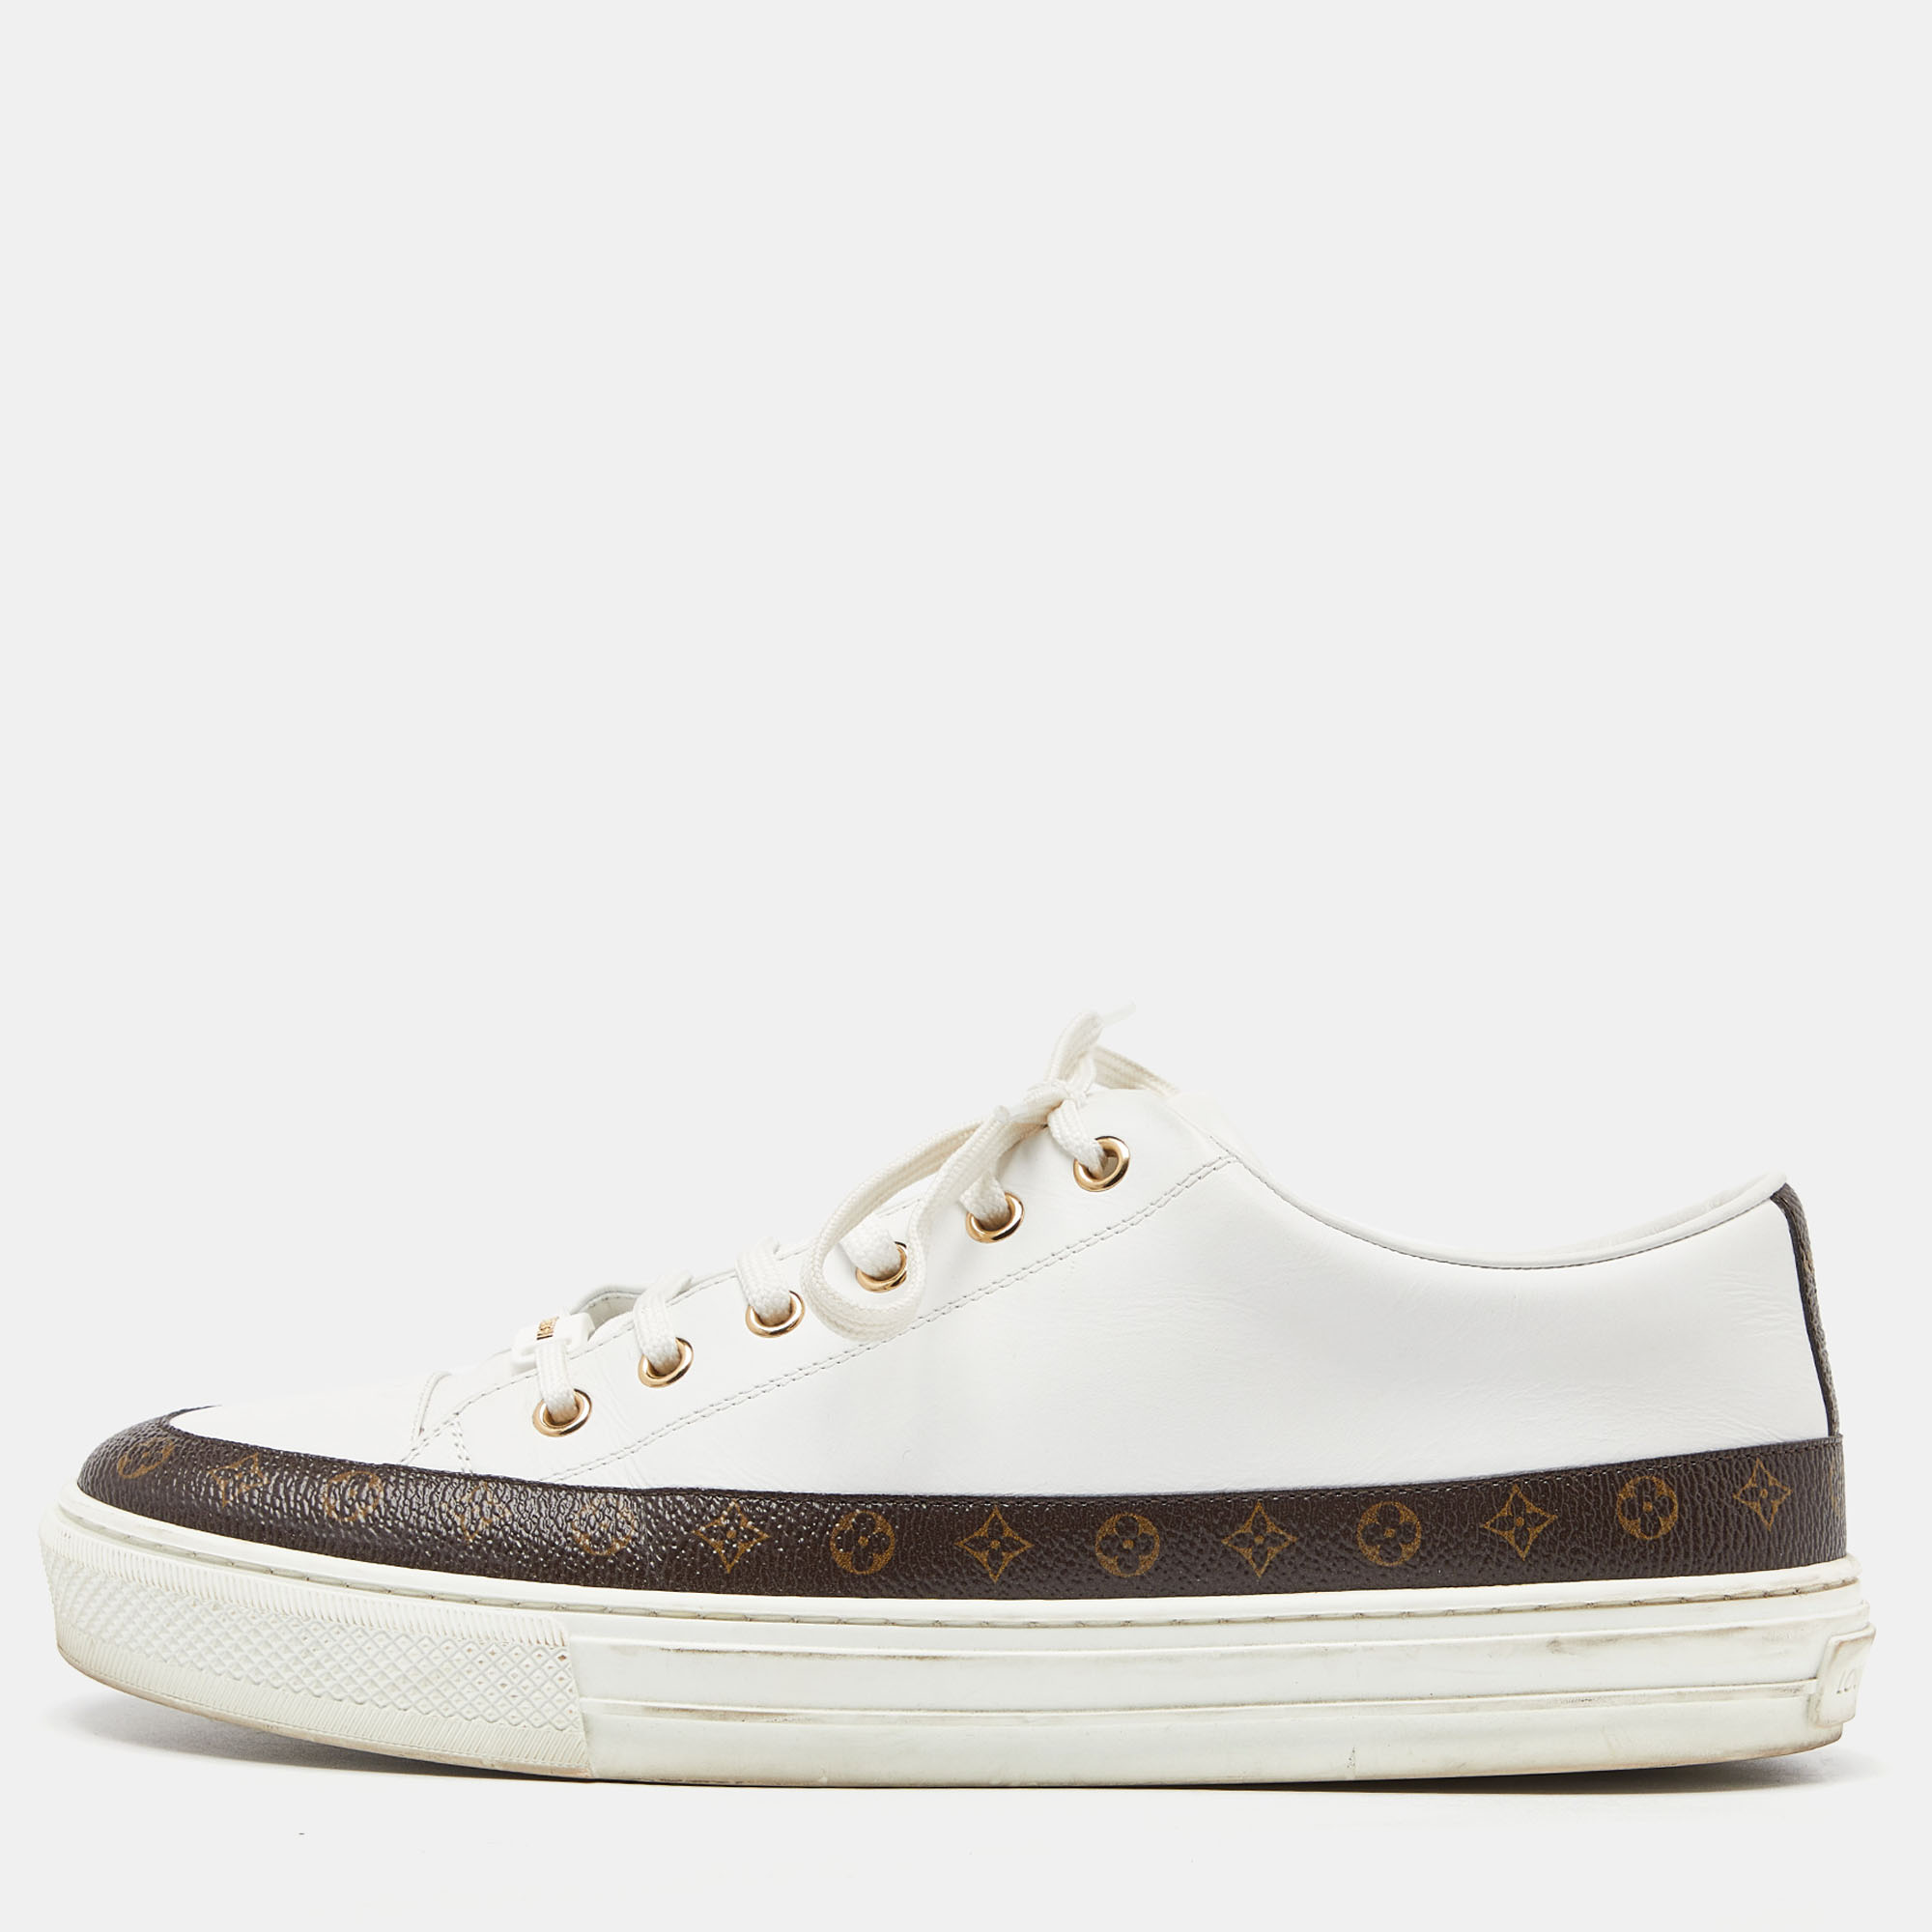 Louis vuitton white/brown leather and monogram canvas stellar low top sneakers size 41